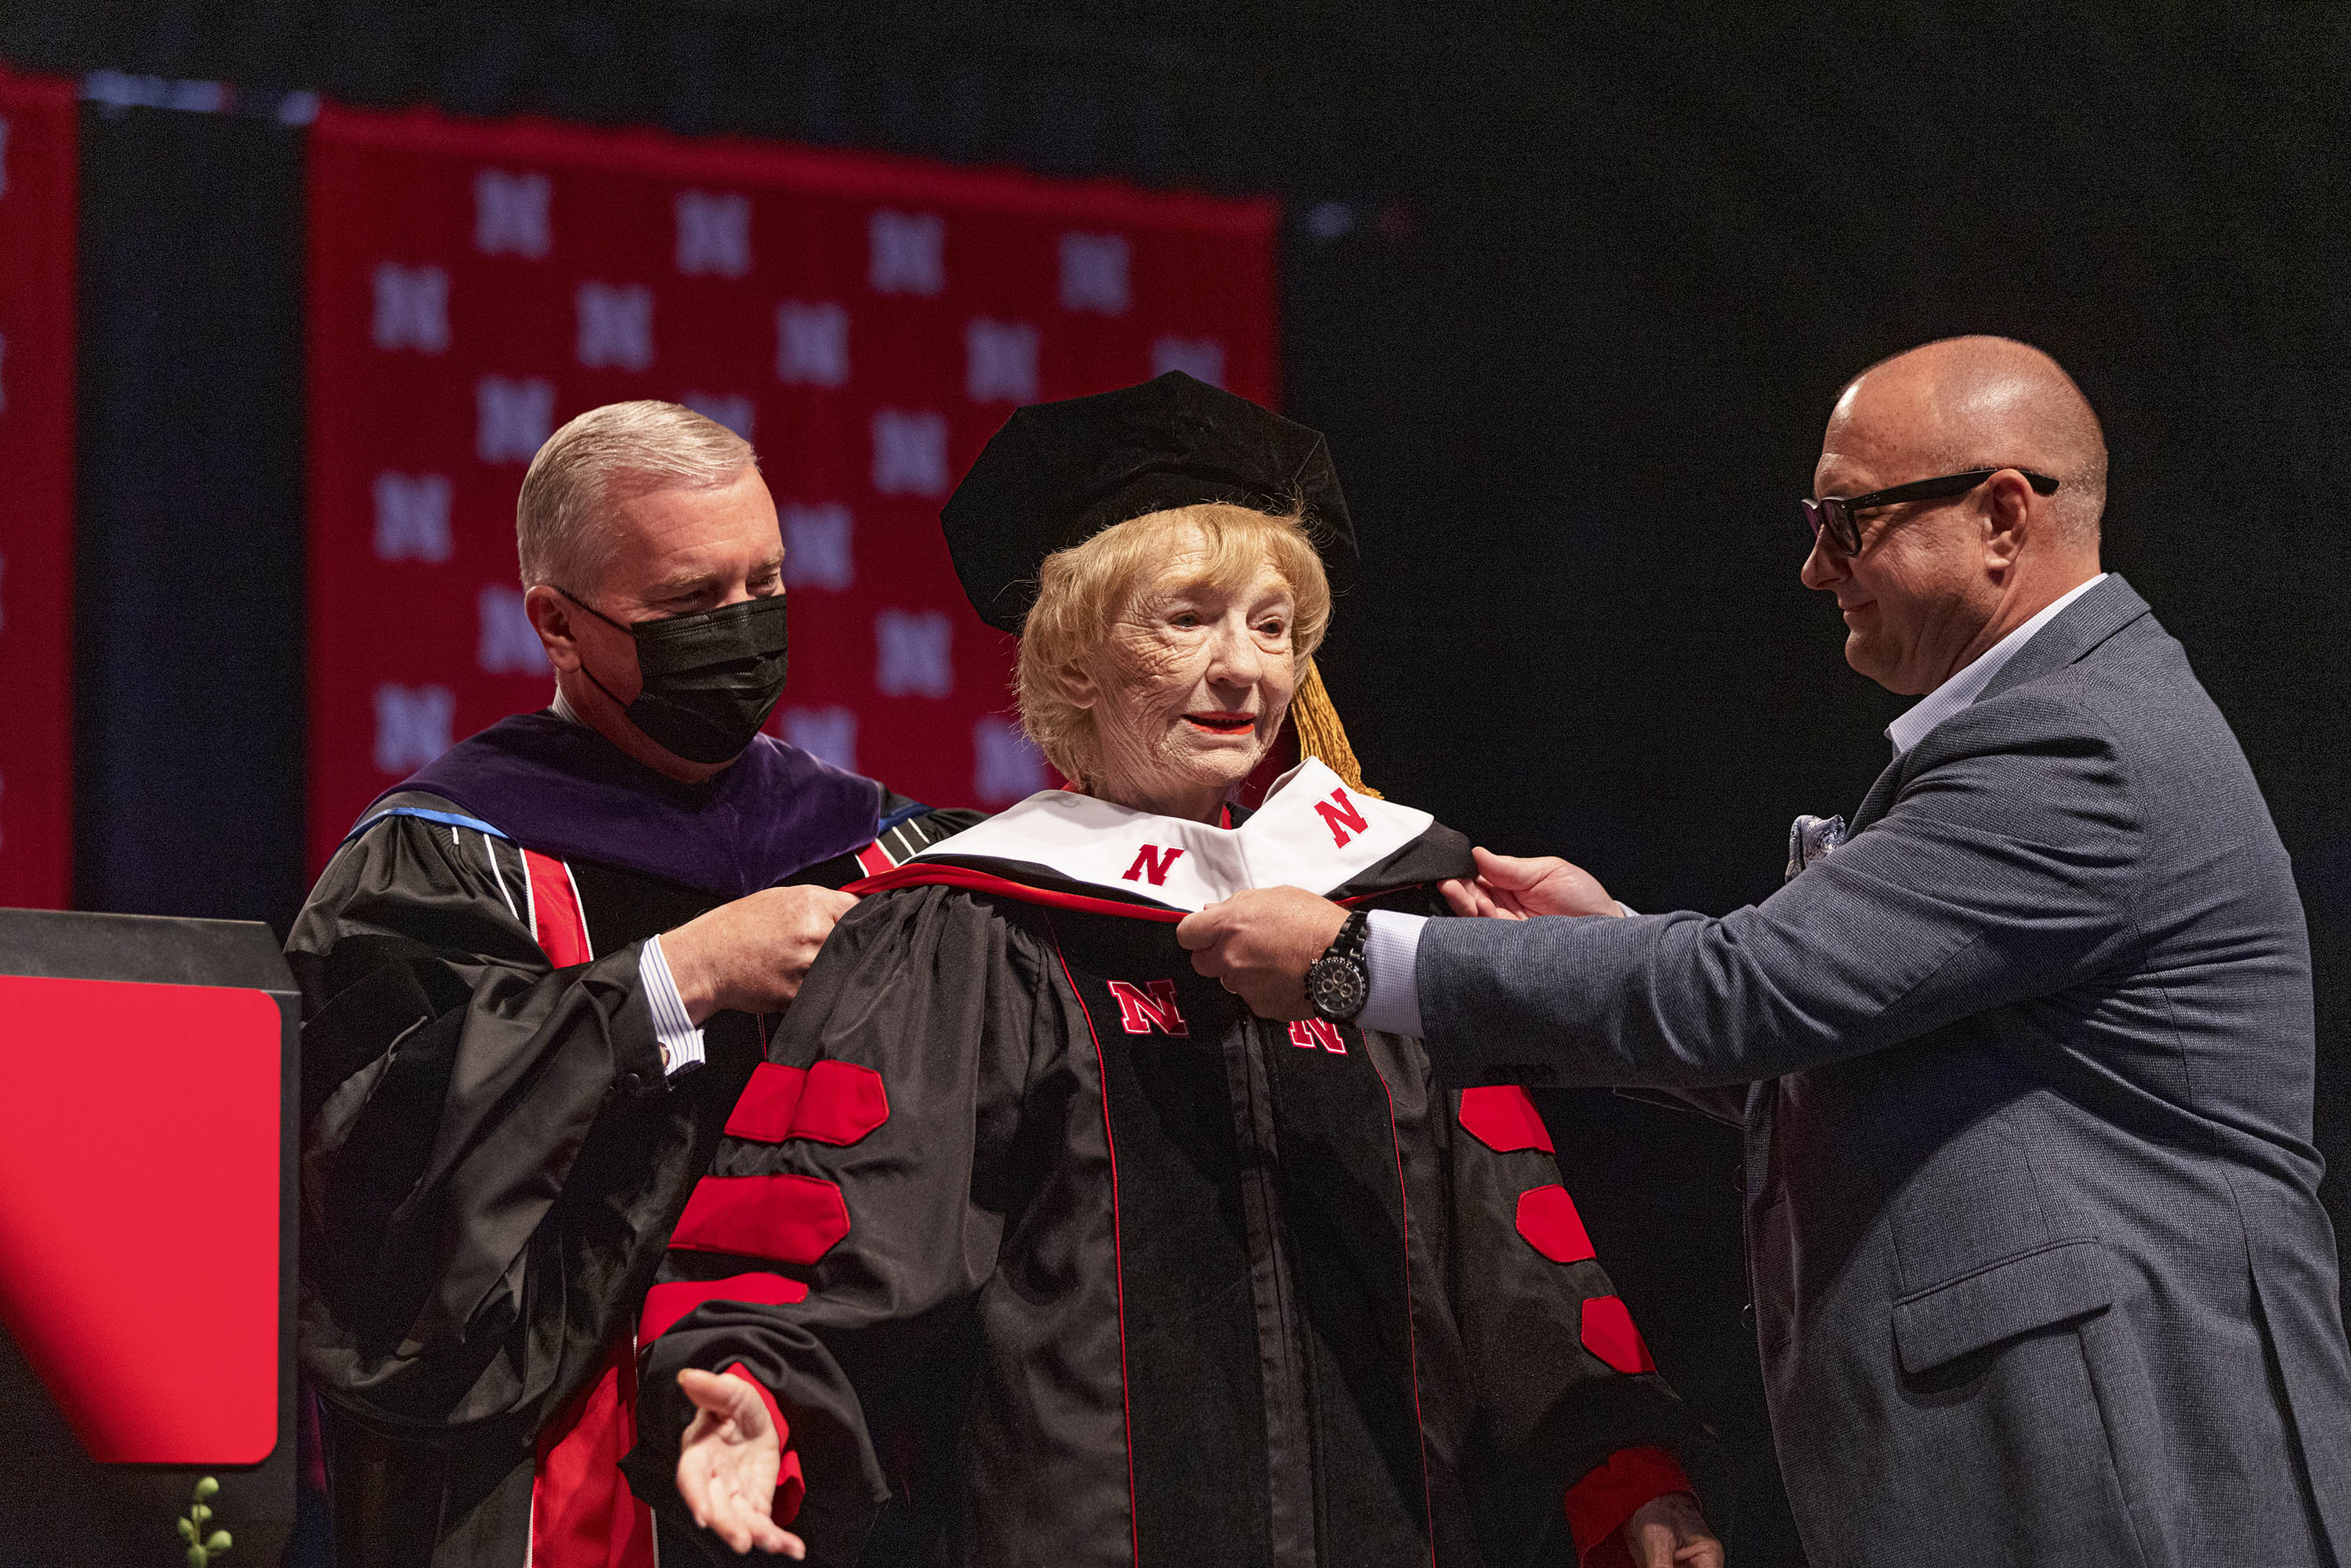 Leta Powell Drake, local television pioneer and Husker alumna, is hooded by University of Nebraska Regent Tim Clare (left) and her son, Aaron (right), during the University of Nebraska–Lincoln’s undergraduate commencement ceremony Aug. 14 at Pinnacle Bank Arena. The university presented Drake with an honorary Doctor of Humane Letters during the ceremony.